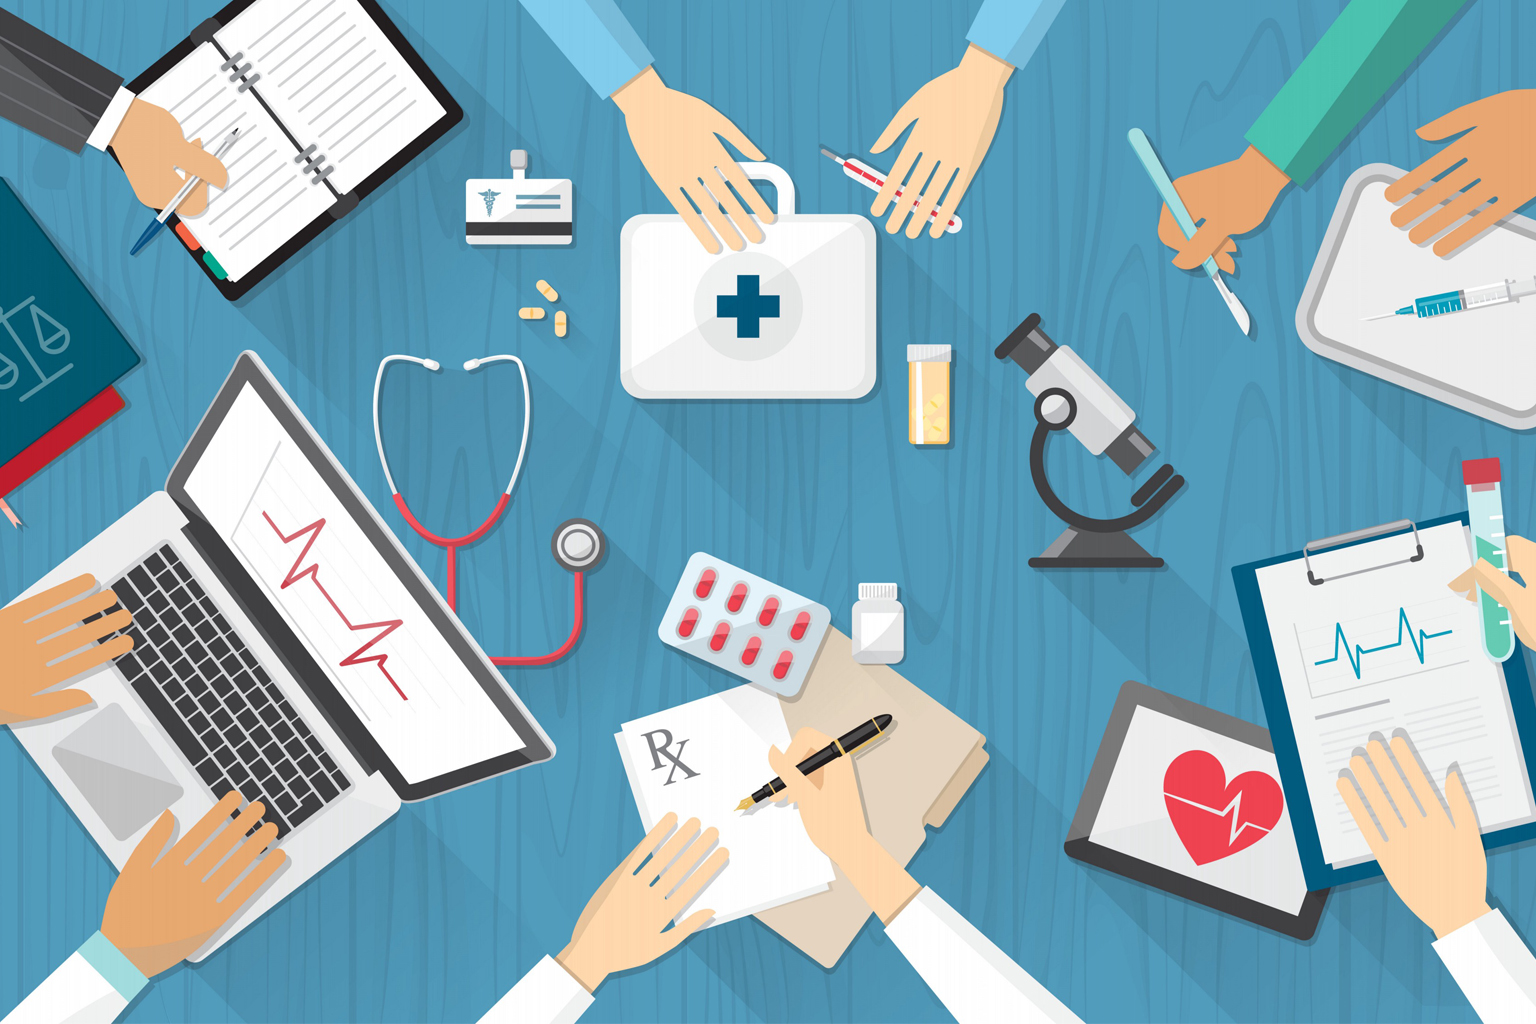 Illustration showing multiple healthcare workers hands working on various tools like laptop, clipboard, etc